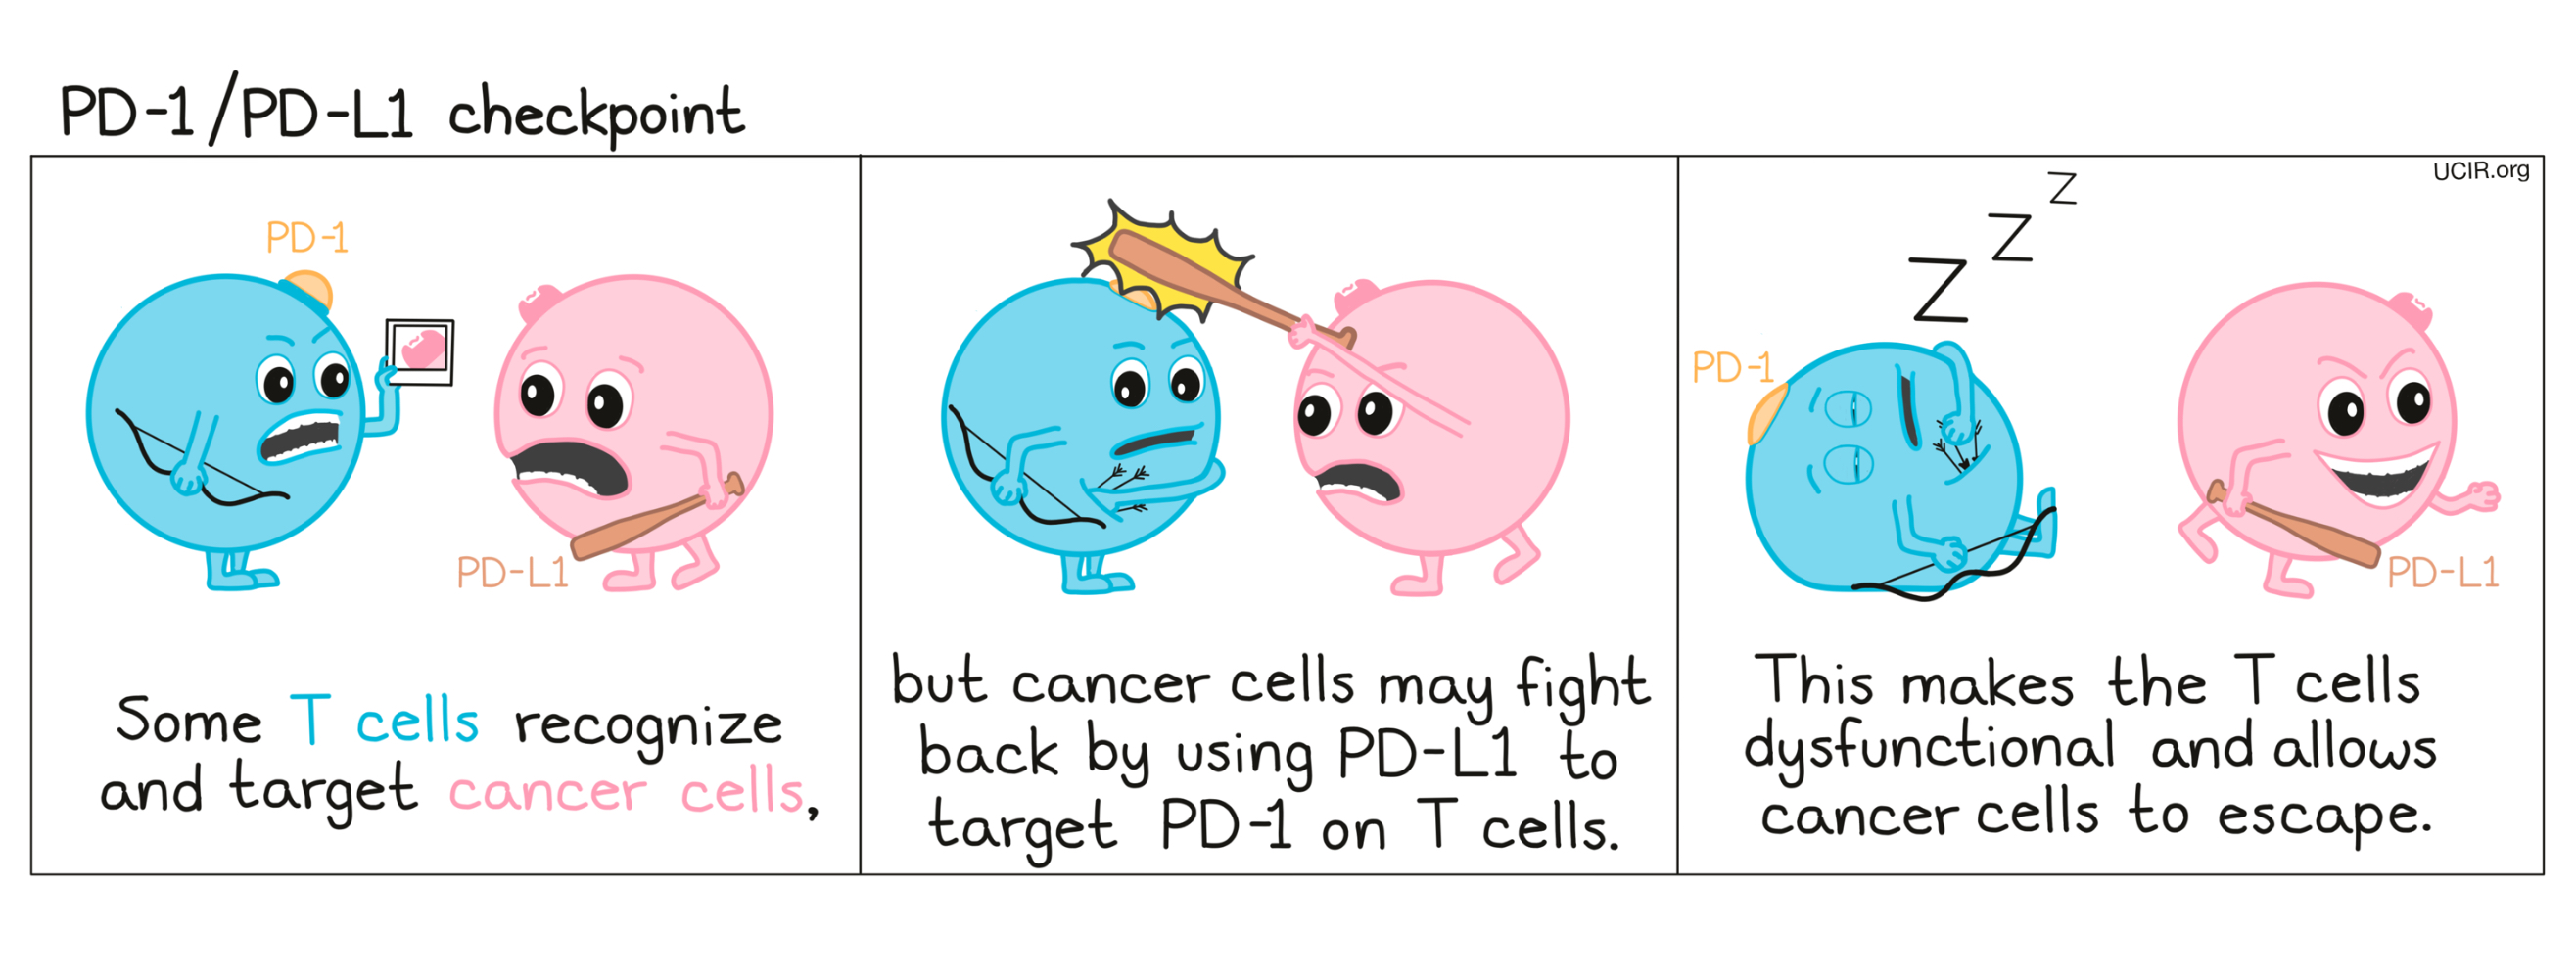 Cartoon that shows how PD-1 and PD-L1 checkpoint works